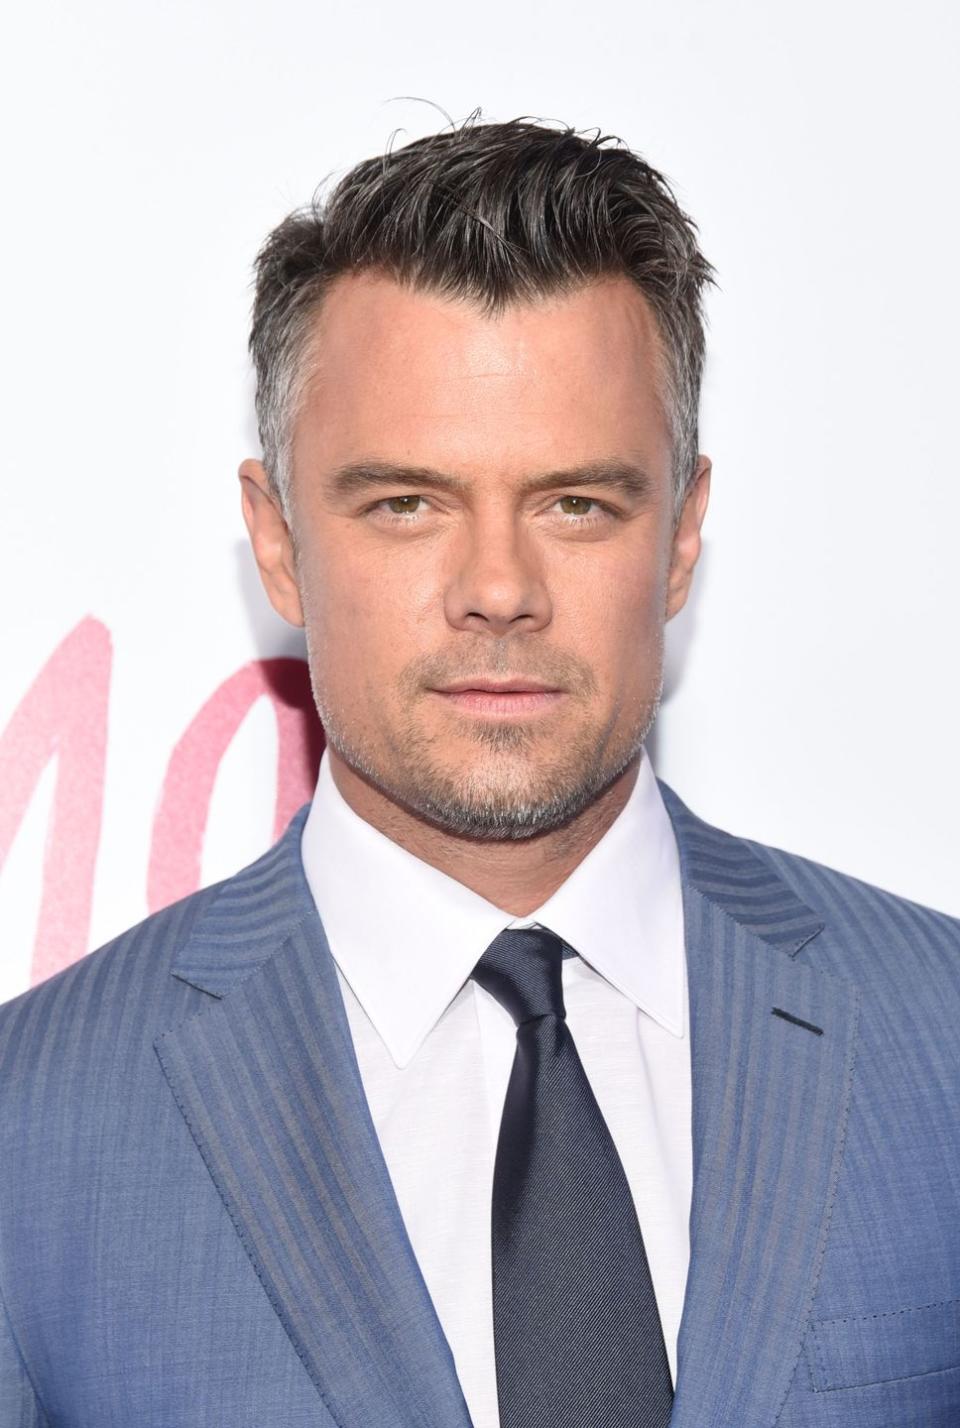 <p>At 46, Duhamel welcomed what comes with aging by letting his hair go gray at the temples and on the sides.</p>